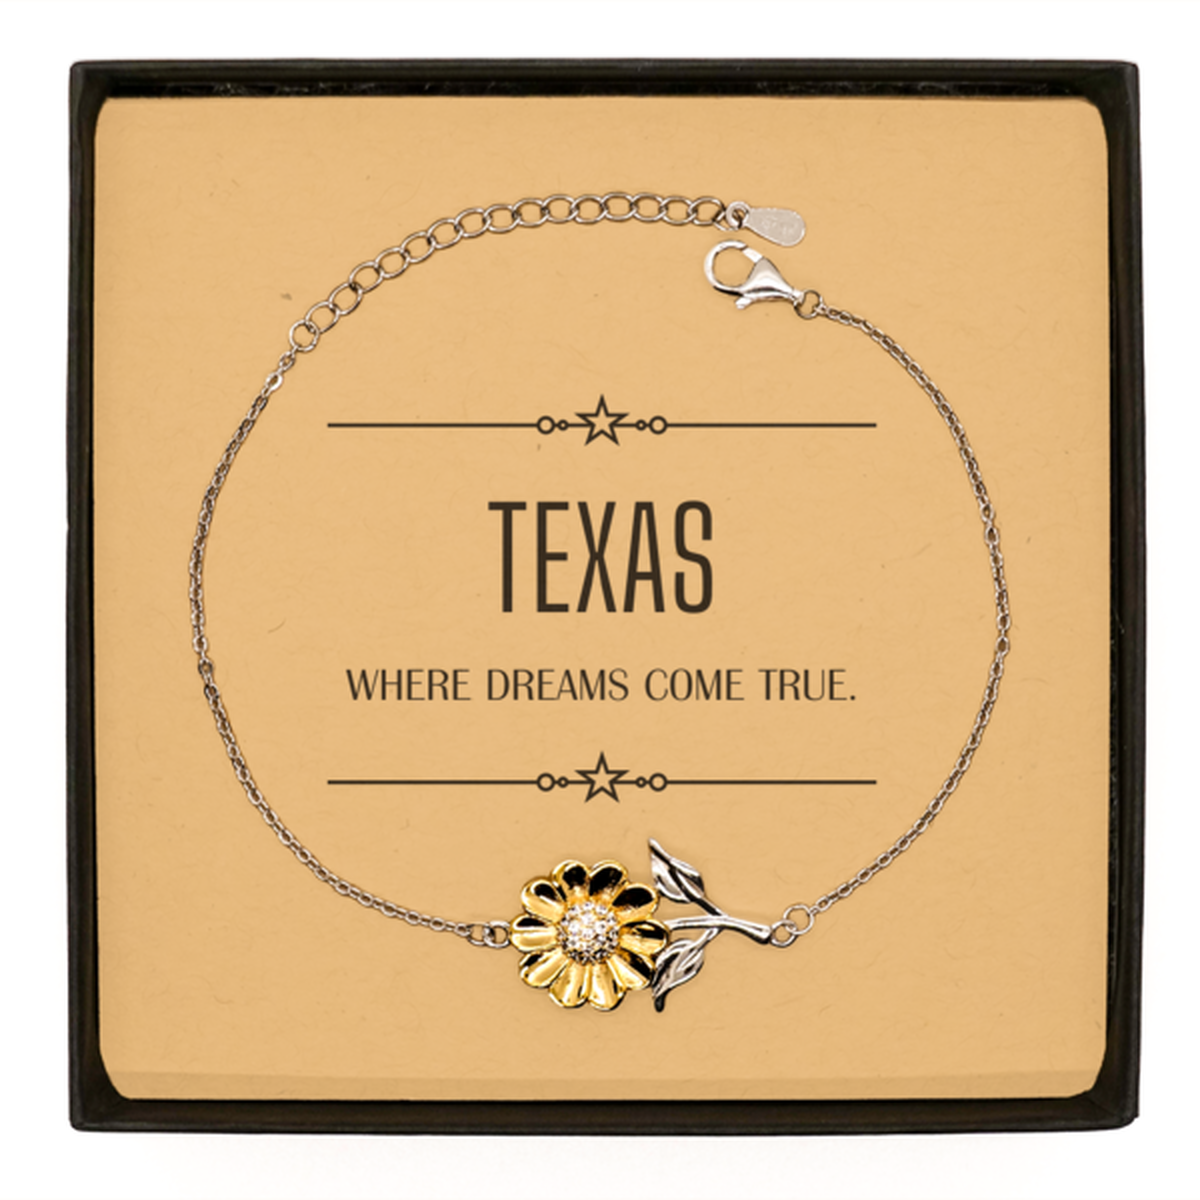 Love Texas State Sunflower Bracelet, Texas Where dreams come true, Birthday Inspirational Gifts For Texas Men, Women, Friends